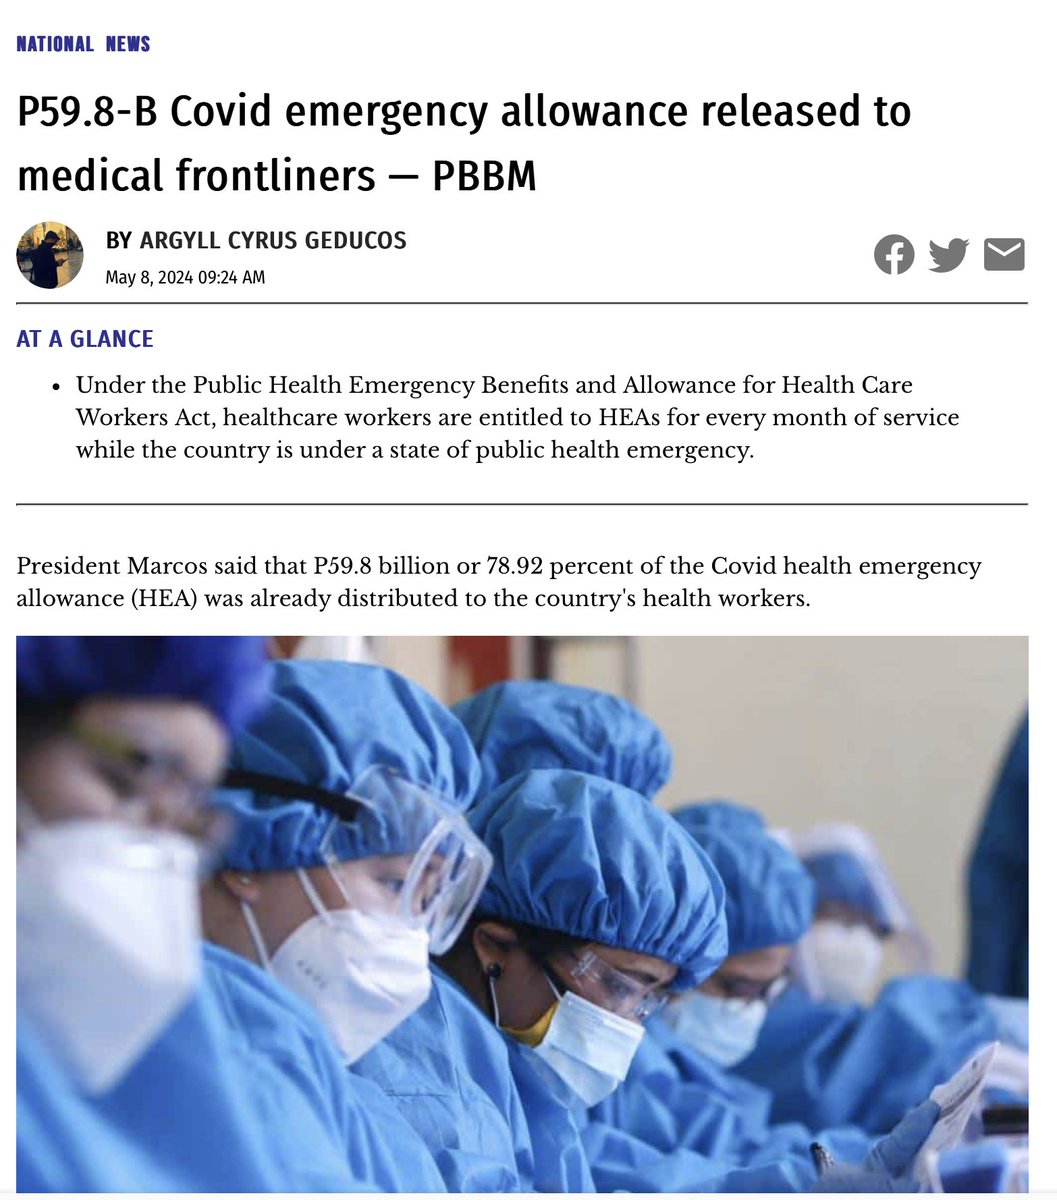 Dolomite beach > Health Emergency Allowance #DuterteLegacy #ExposeTheDutertes Few days ago, President Marcos proudly reported that 78.2% of the Health Emergency Allowance the government owed to the pandemic frontliners has already been released! Amounting to 59.8 Billion!